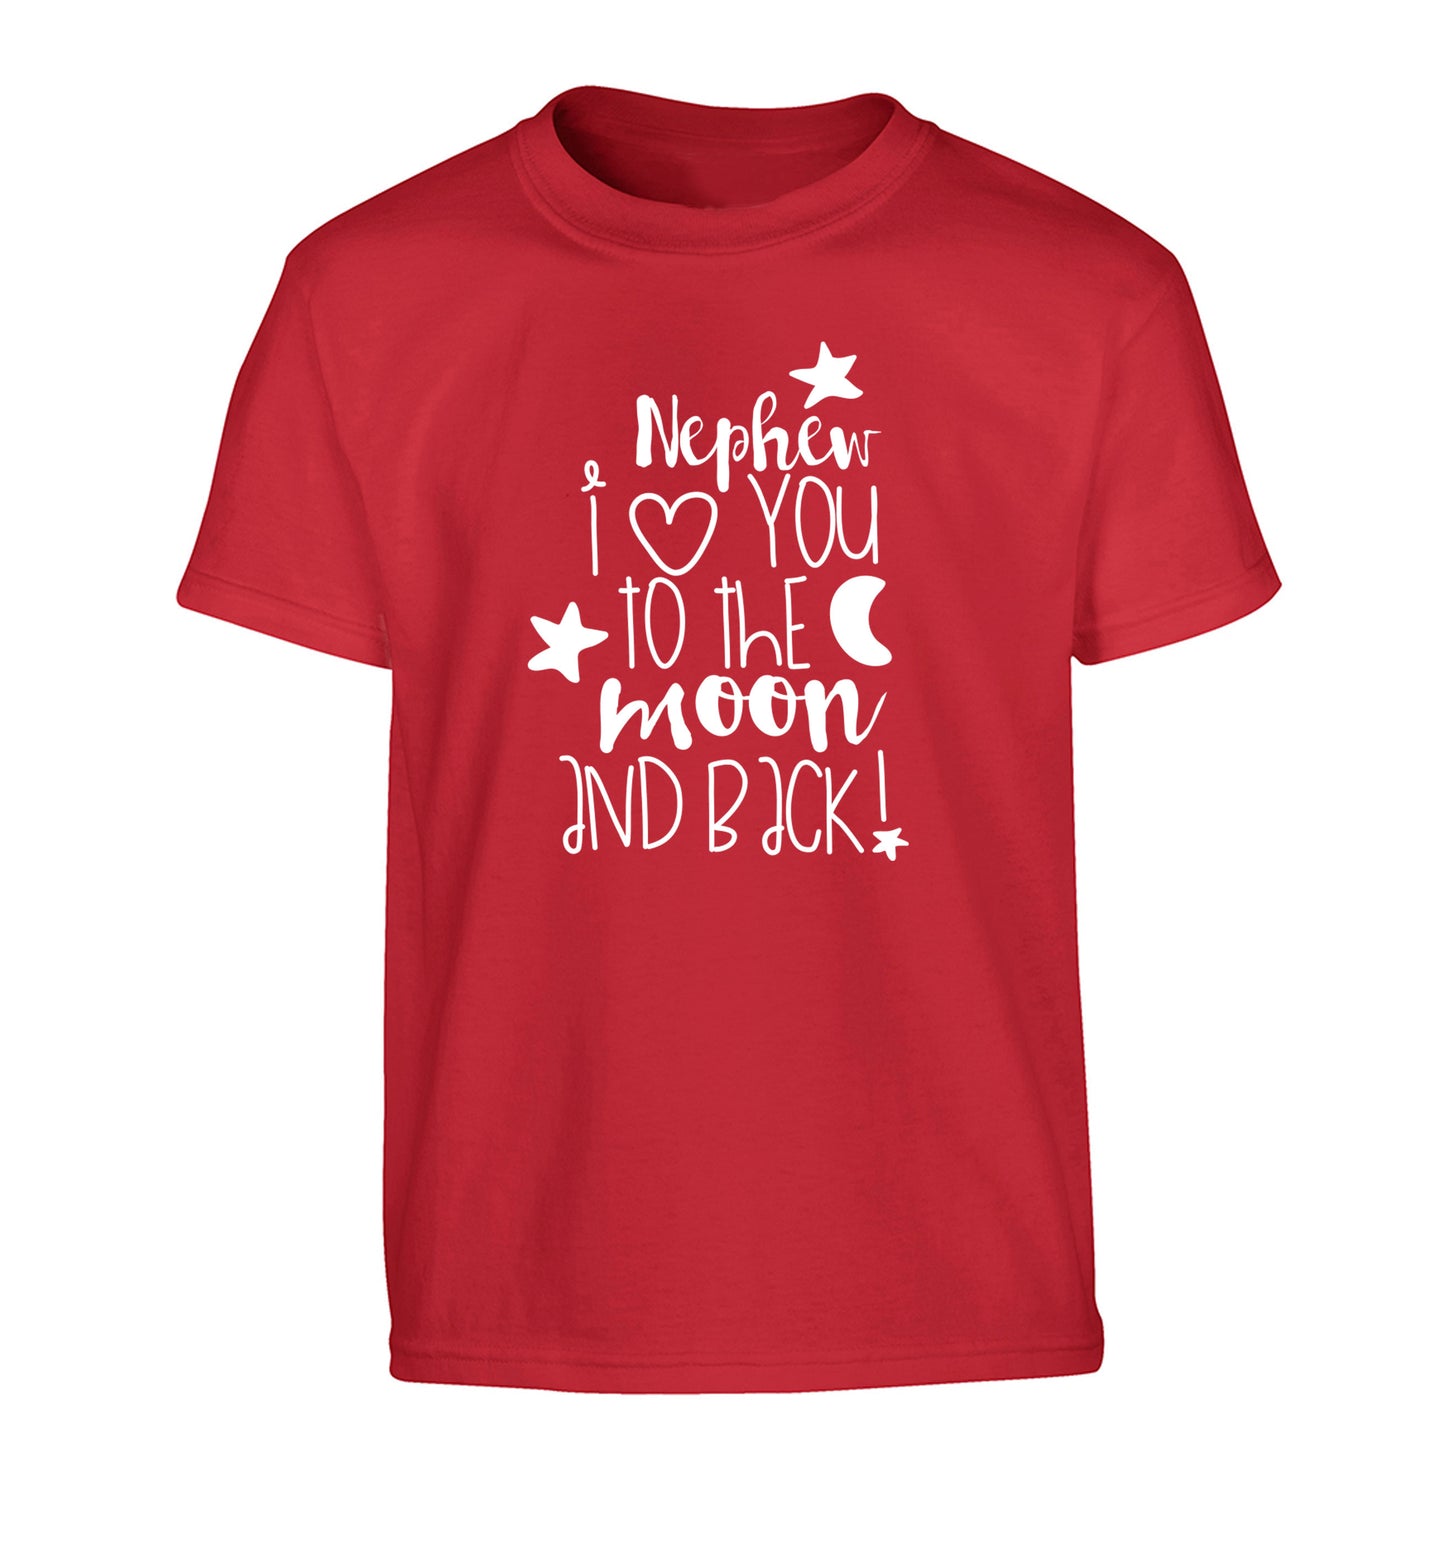 Nephew I love you to the moon and back Children's red Tshirt 12-14 Years